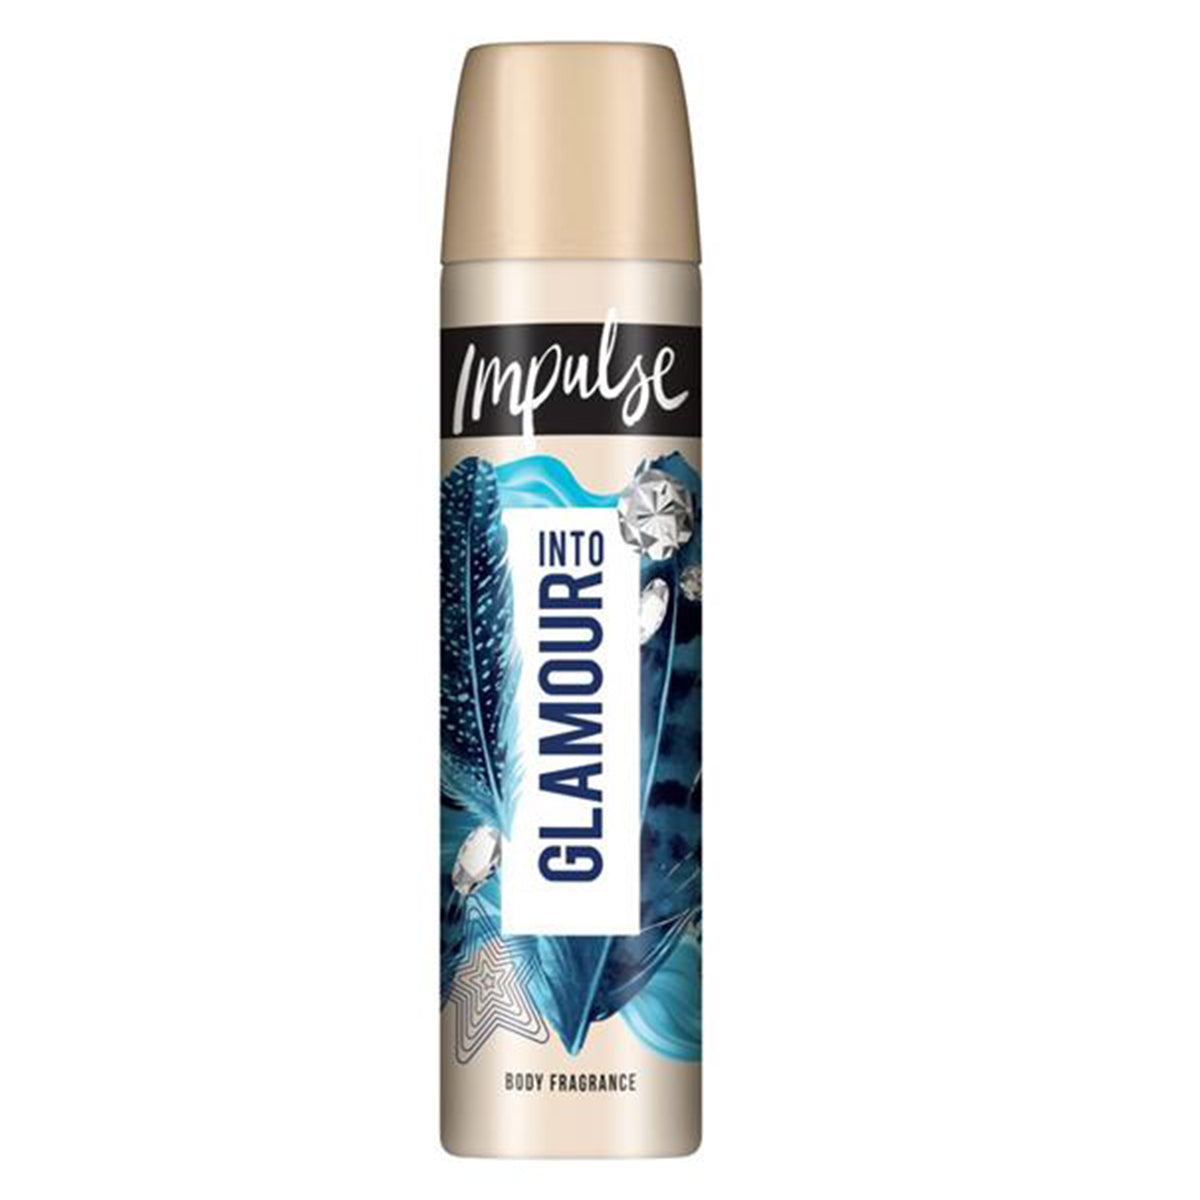 An image of an Impulse - Into Glamour Body Fragrance Deodorant - 75ml spray bottle with a white background.